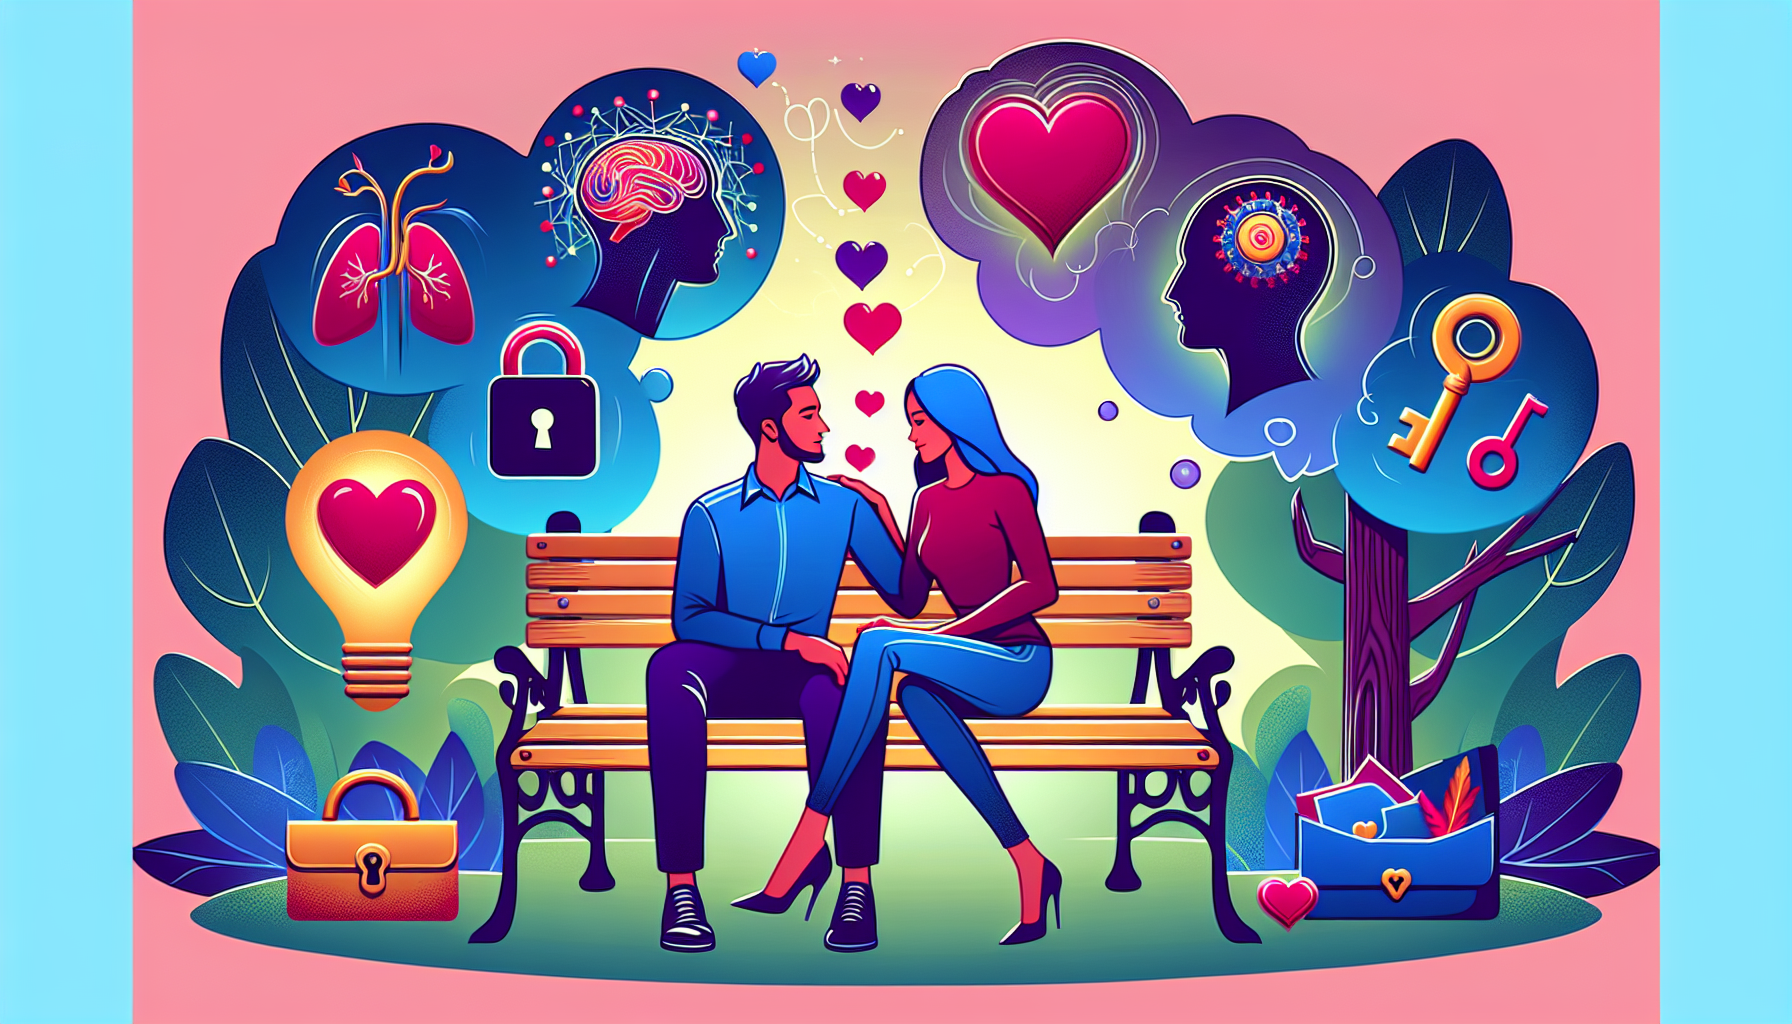 Illustrate a romantic scene highlighting the concepts of psychology in a captivating love story. Create the image in a modern style, replete with vibrant, eye-catching colors. Imagine two distinct characters displaying actions that suggest the intricate psychology behind love and attraction. For instance, they could be comfortably seated on a cozy park bench, whispering sweet nothings to each other, while subtle visual cues around them suggest different psychological aspects. A thought bubble might reveal a character's deepest thoughts or fears about love, for instance. To symbolize the concept of romance, there could be symbolic visual elements like a heart-shaped lock or a pair of crossed keys.